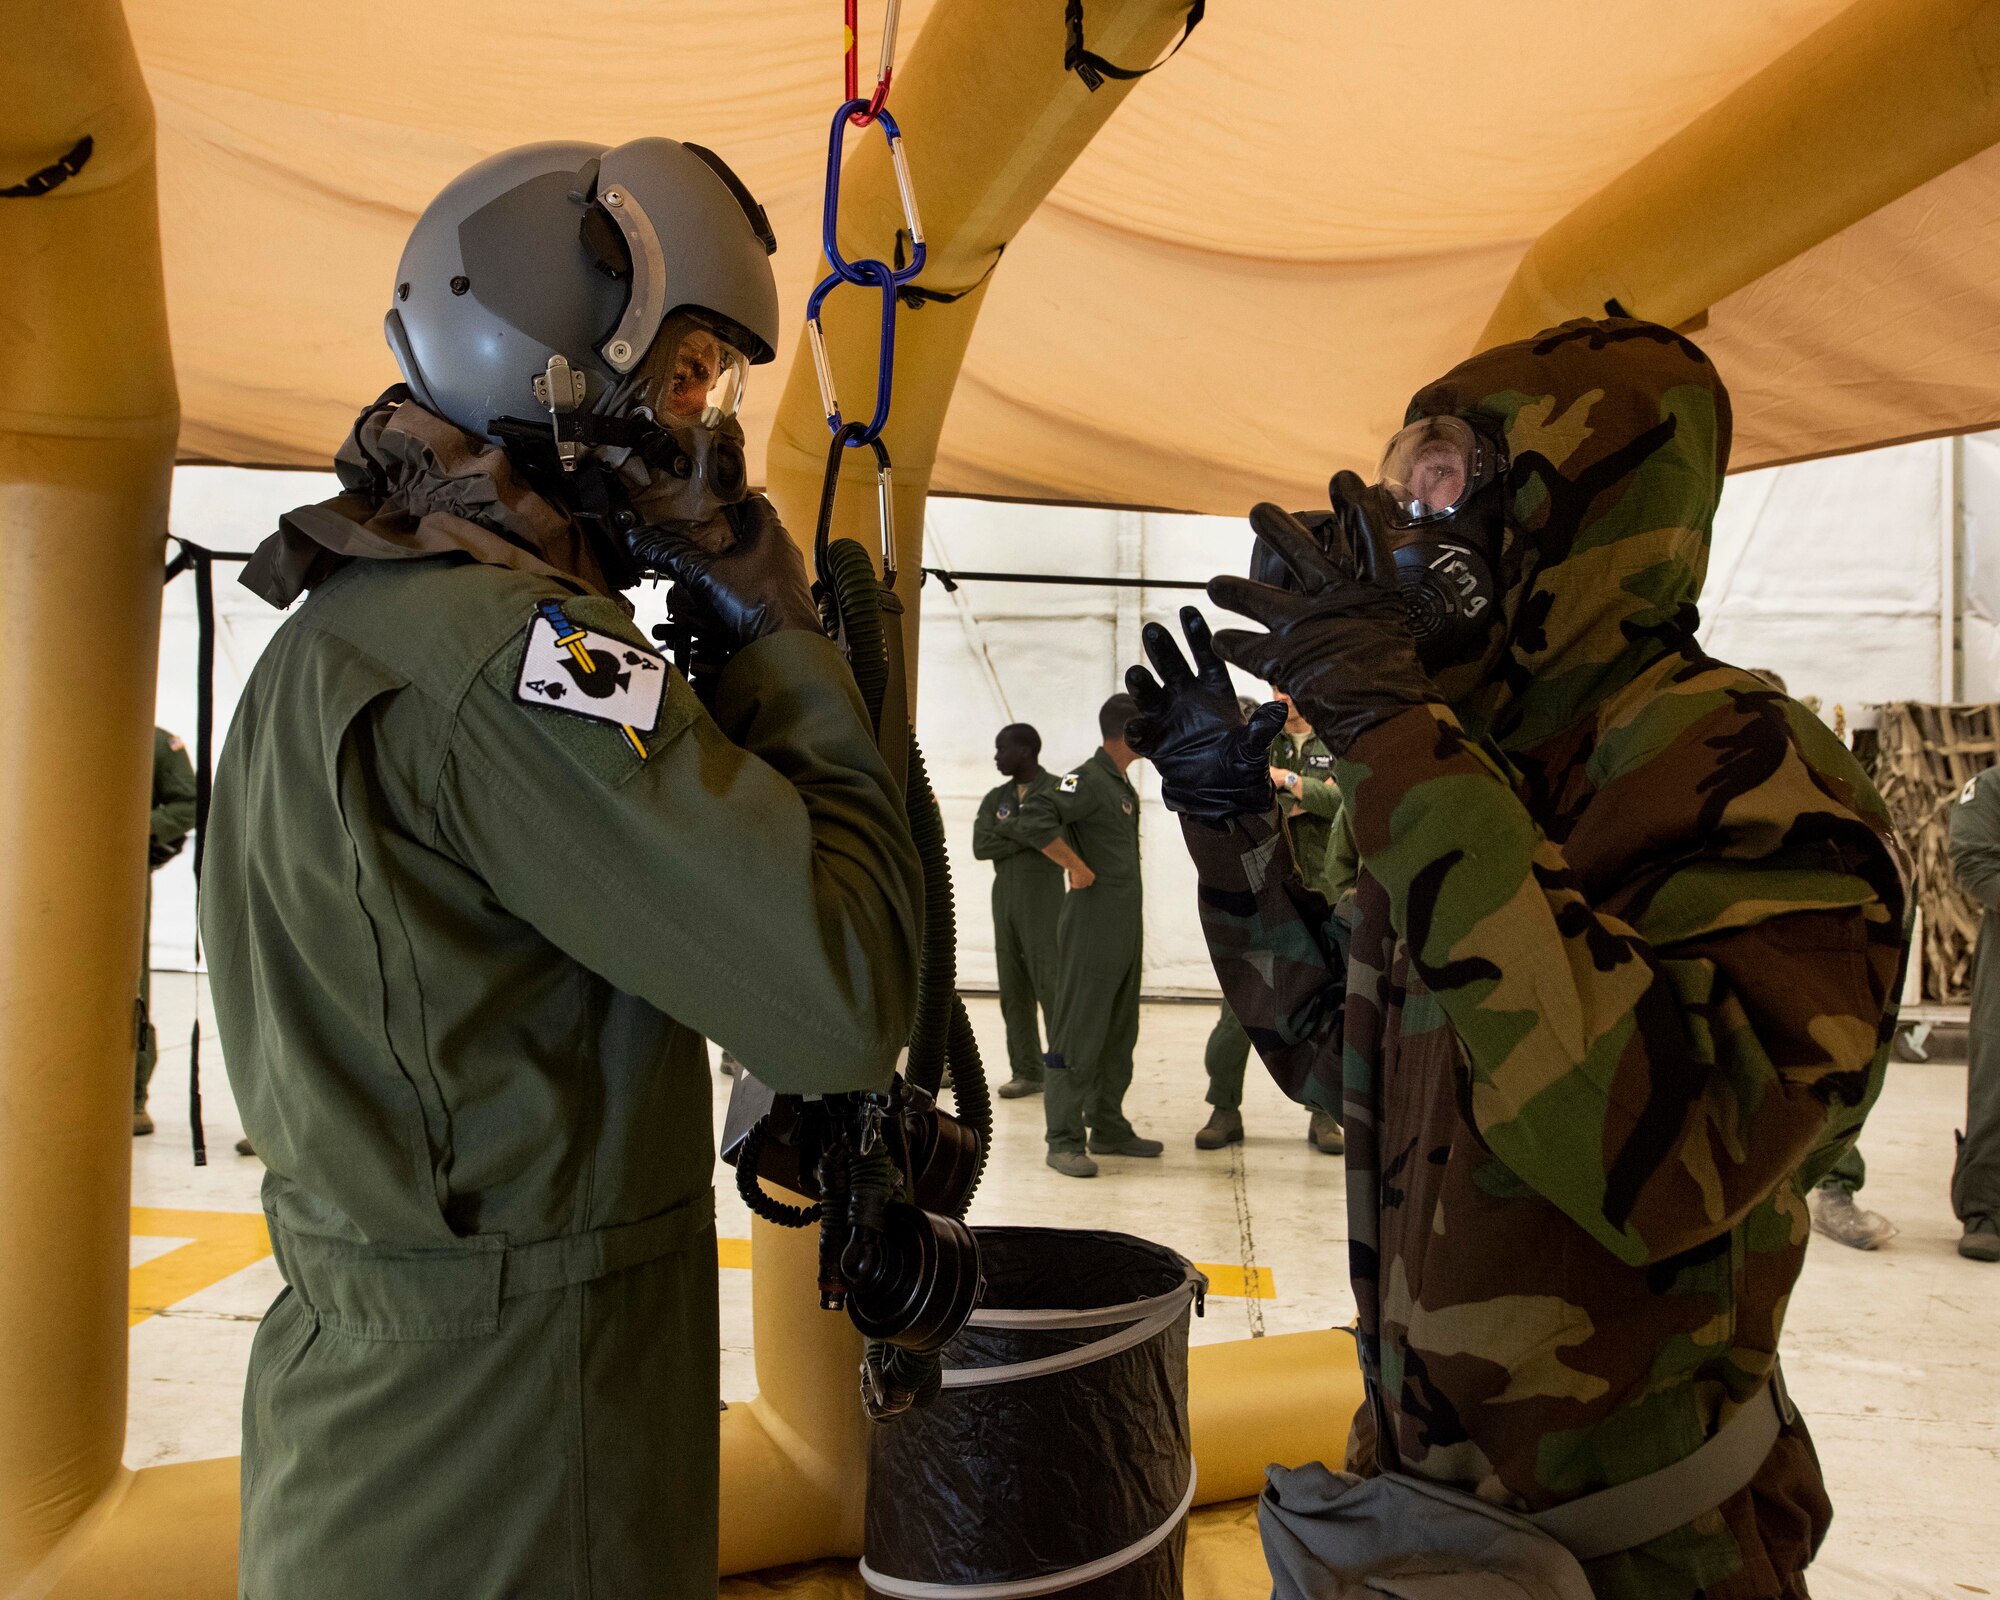 Senior Airman Jacob Stewart, an aircrew flight equipment technician with the 141st Operations Support Squadron, guides Tech. Sgt. Steve Kerr, a boom operator with the 116th Air Refueling Squadron, through the Aircrew Contamination Control Area June 7, 2018 at Fairchild Air Force Base, Wash. Guardsmen from the 141st OSS set up a mock ACCA line for training on the decontamination procedures involving aircrew members in response to a chemical, biological, radiological or nuclear attack. (U.S. Air National Guard photo by Staff Sgt. Rose M. Lust)